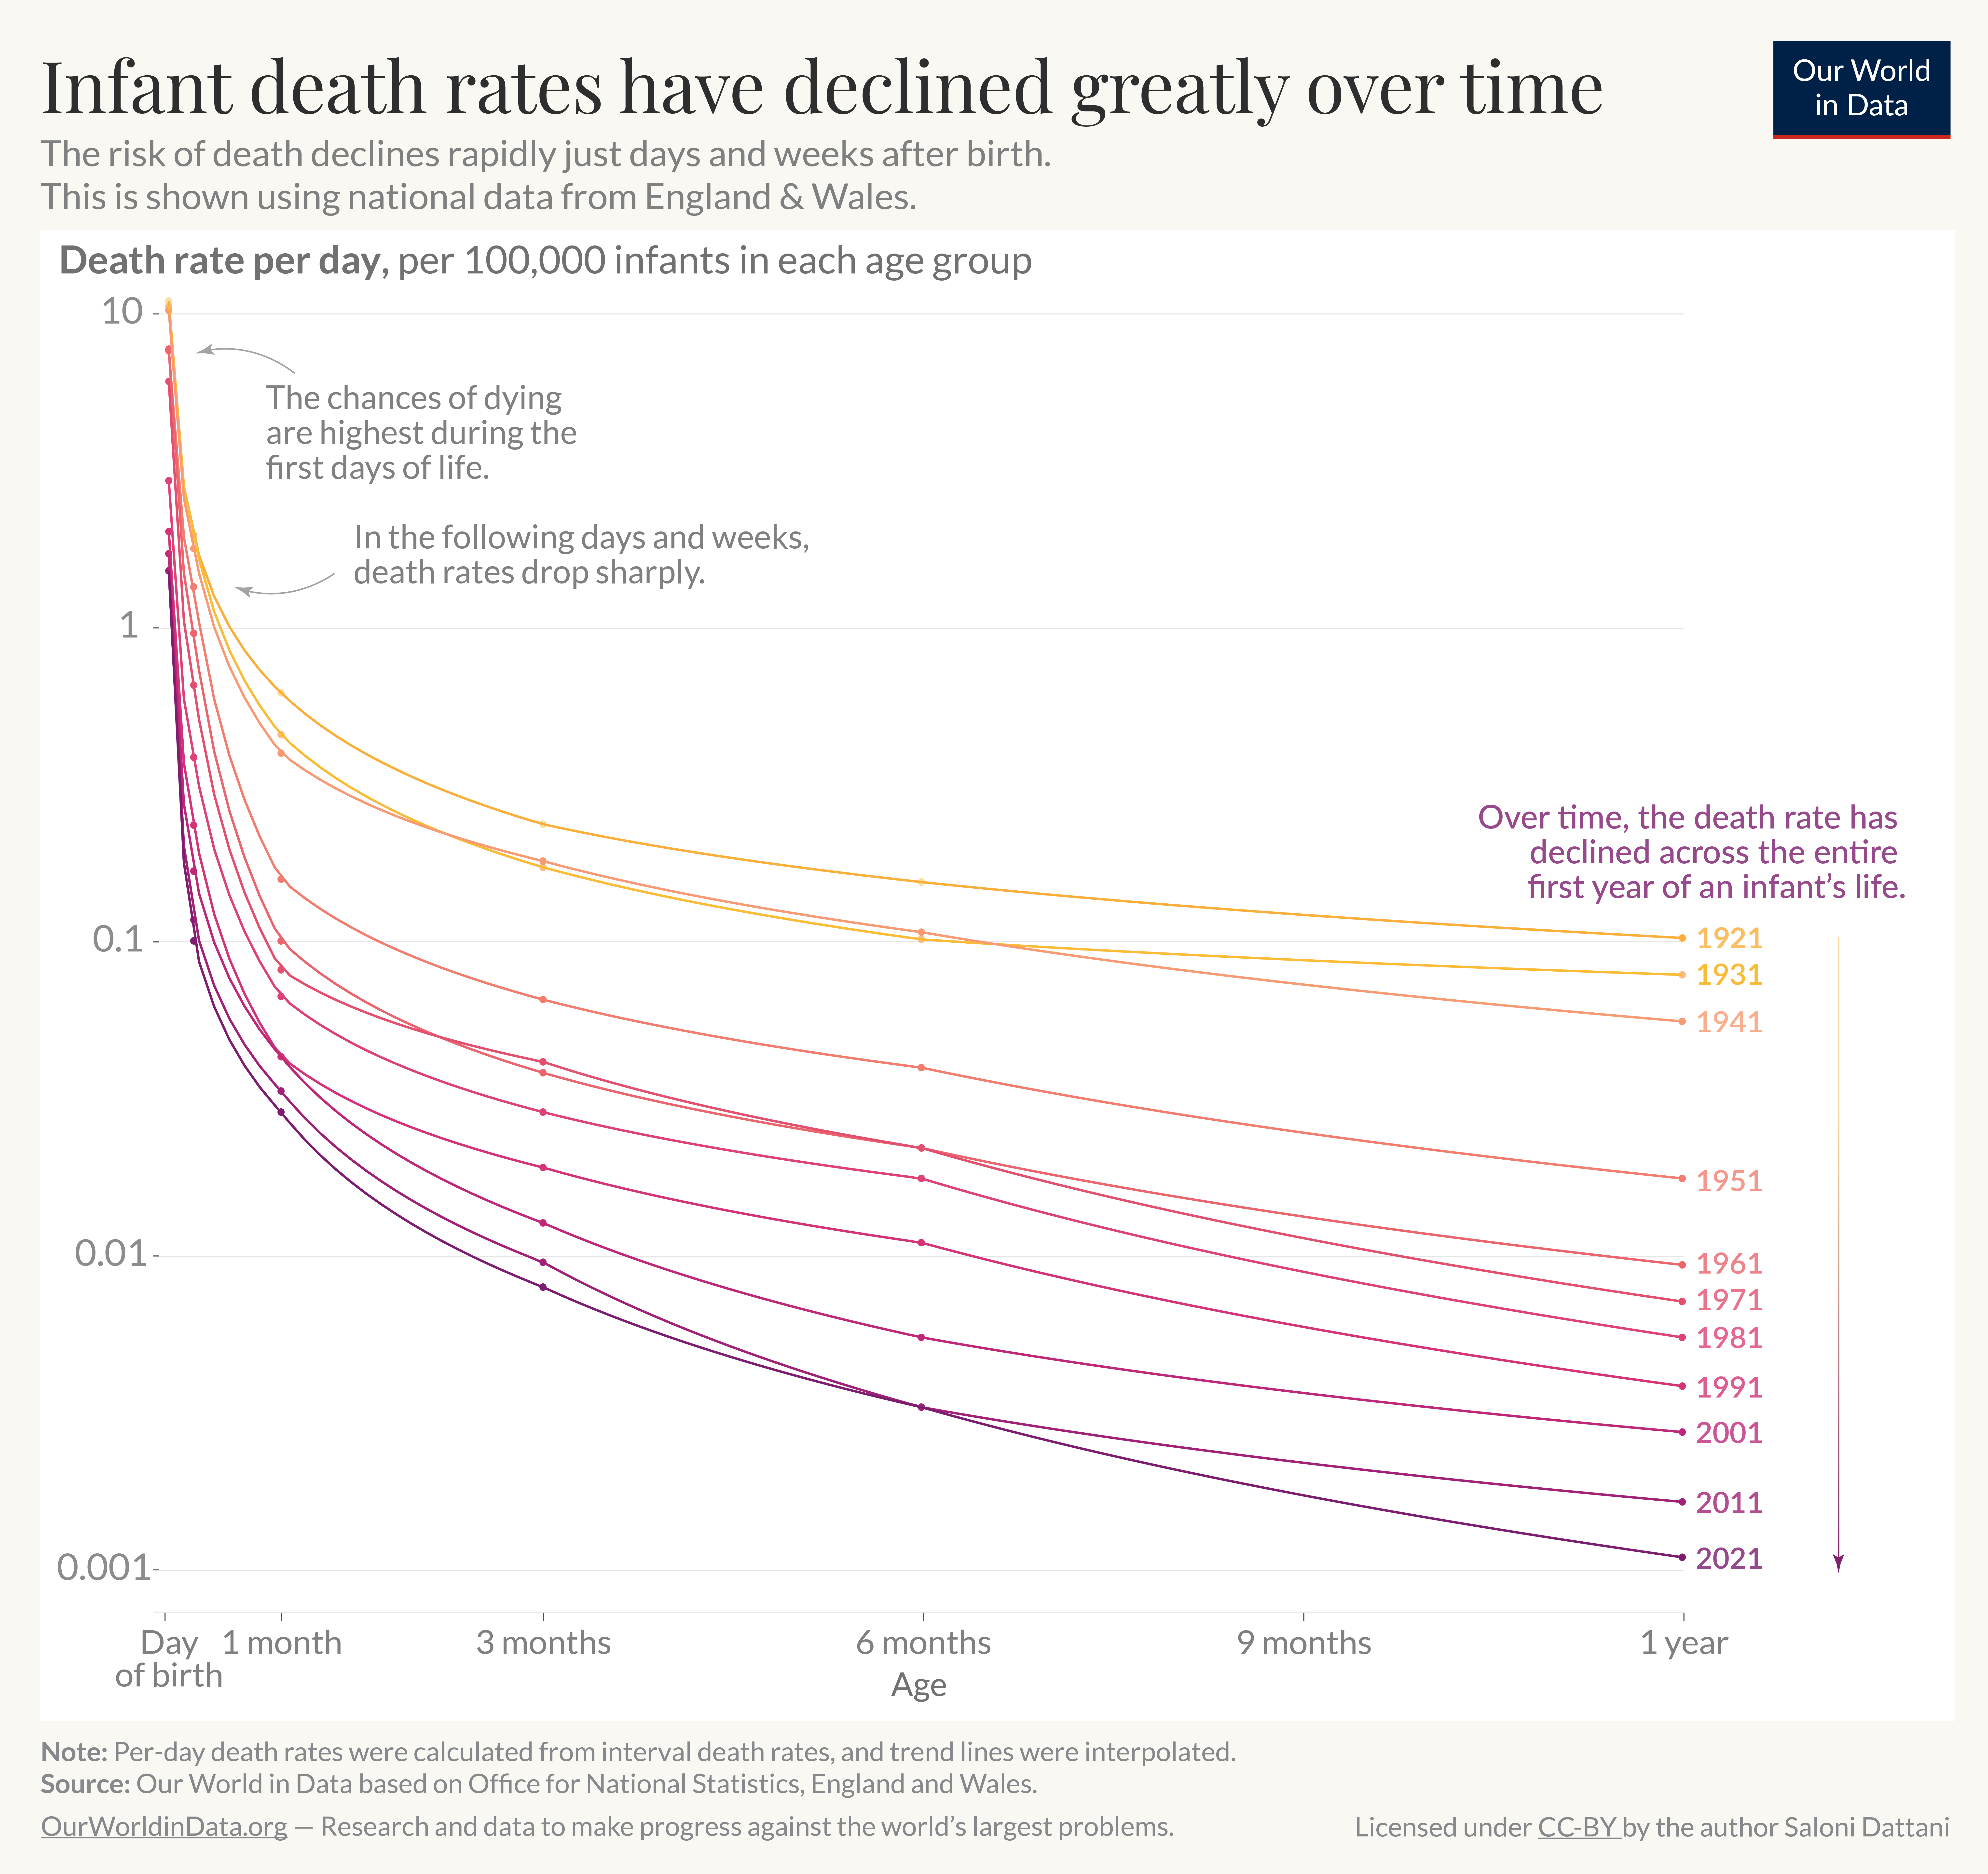 Per-day mortality rates in infants over time, using data from the ONS in the UK.